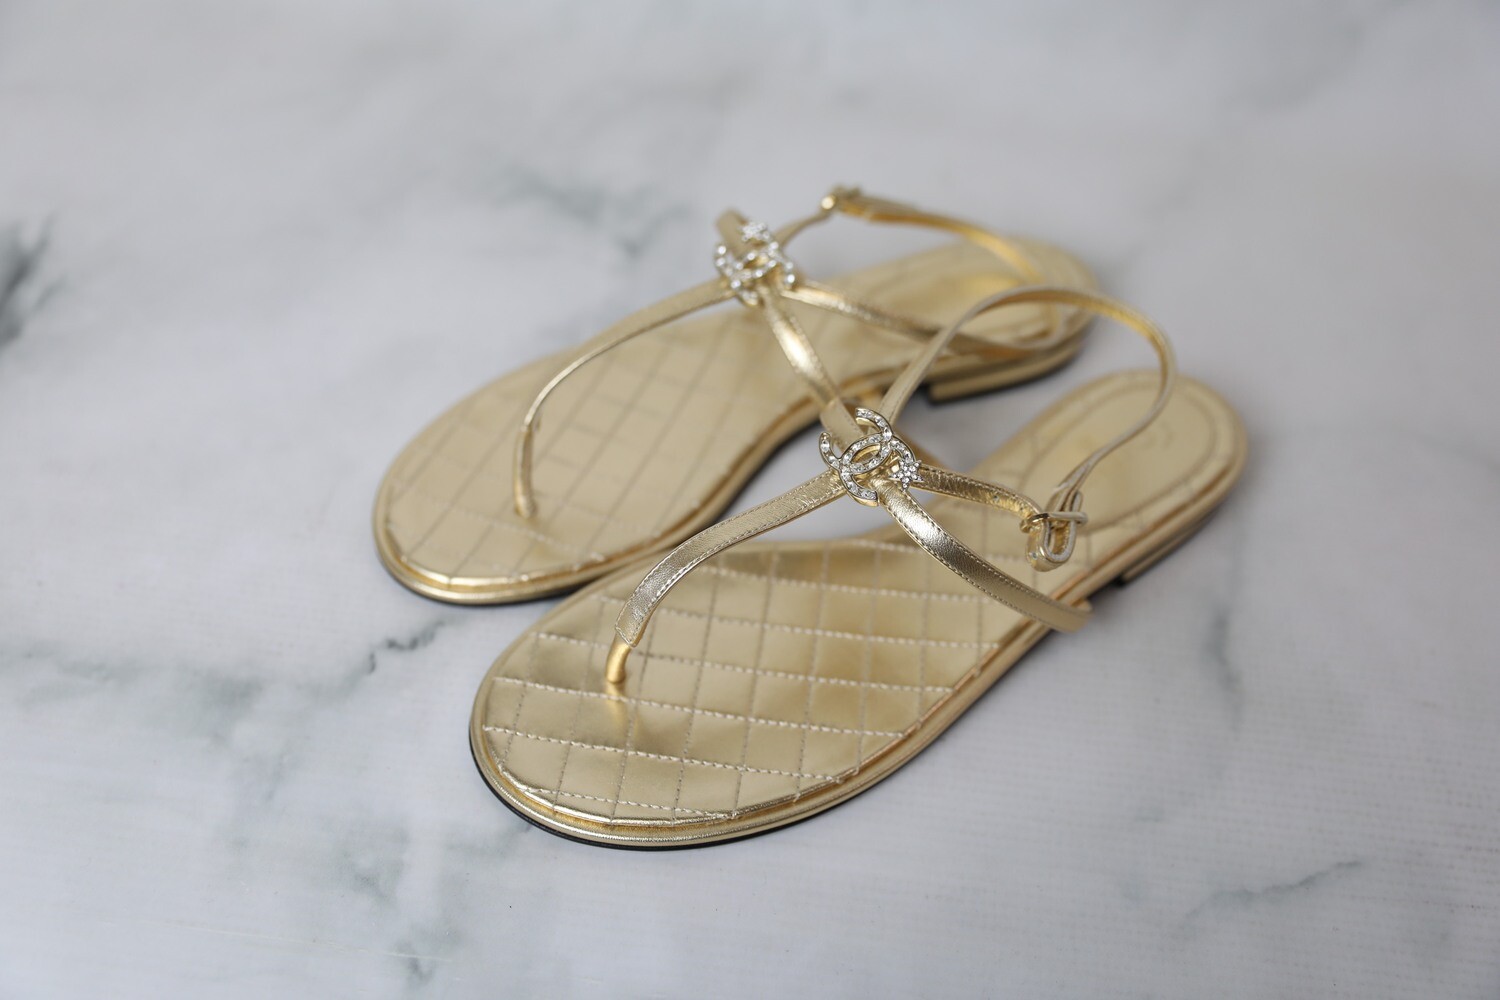 Chanel Shoes Flat Thong Sandals, Gold , Size 38.5, New in Box WA001